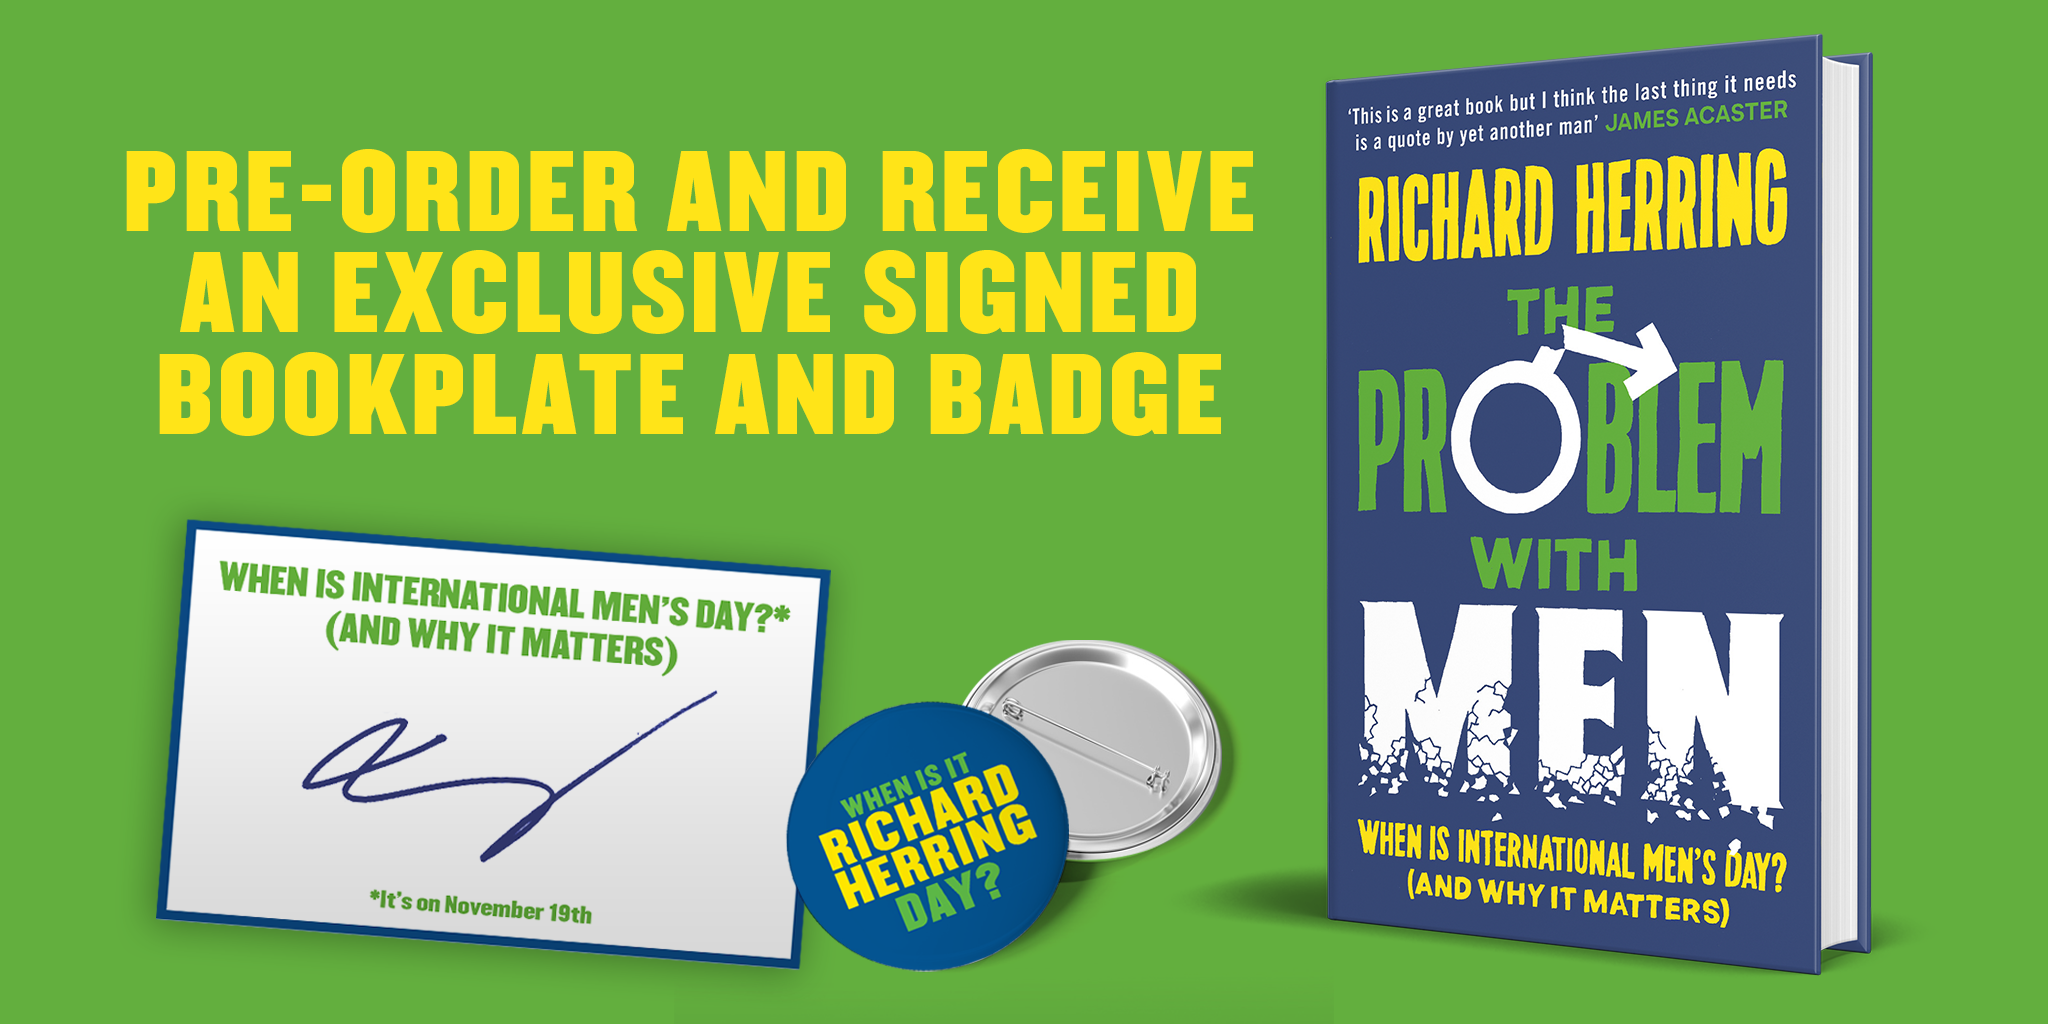 Pre-order The Problem With Men by Richard Herring and receive an exclusive signed bookplate and badge